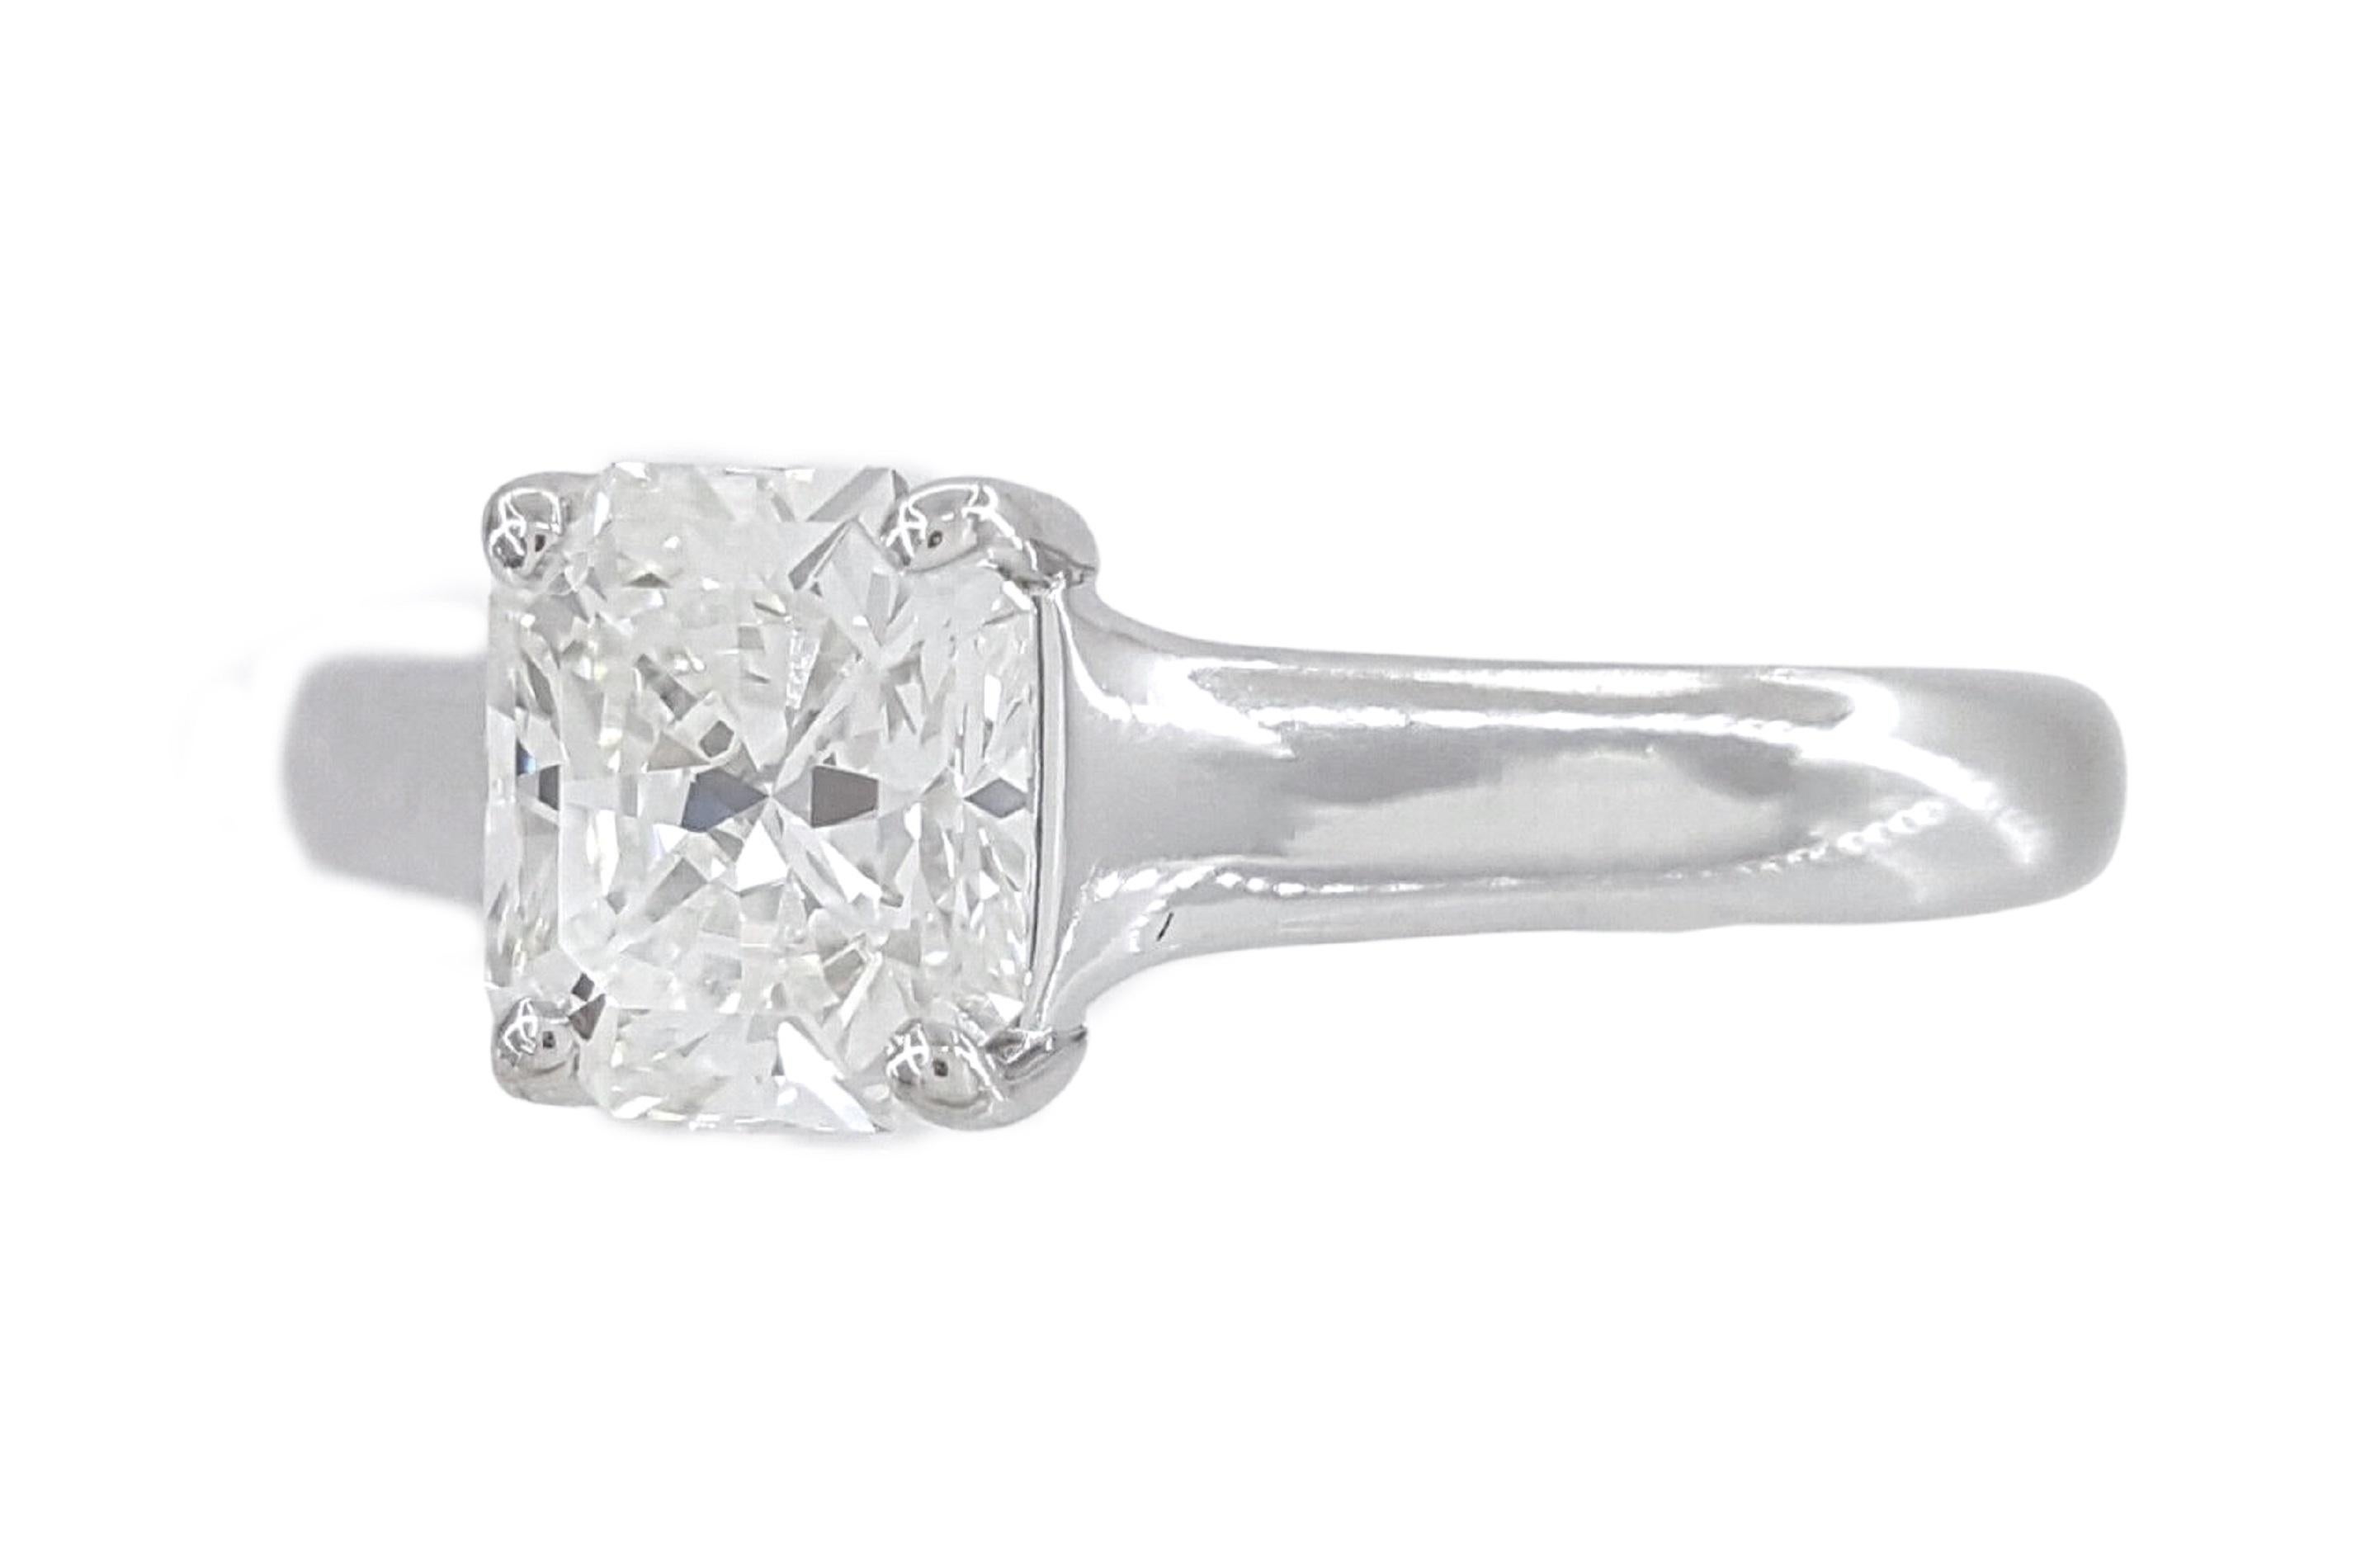 Lucida Cut Diamond Solitaire Engagement Ring.

The ring weighs 5.2 grams, size 9, the center stone is a Lucida® Rectangular Brilliant Cut diamond weighing 1.08 ct, I in color, VVS1 in clarity. The center stone has a EXCELLENT Cut, Very Good Polish,